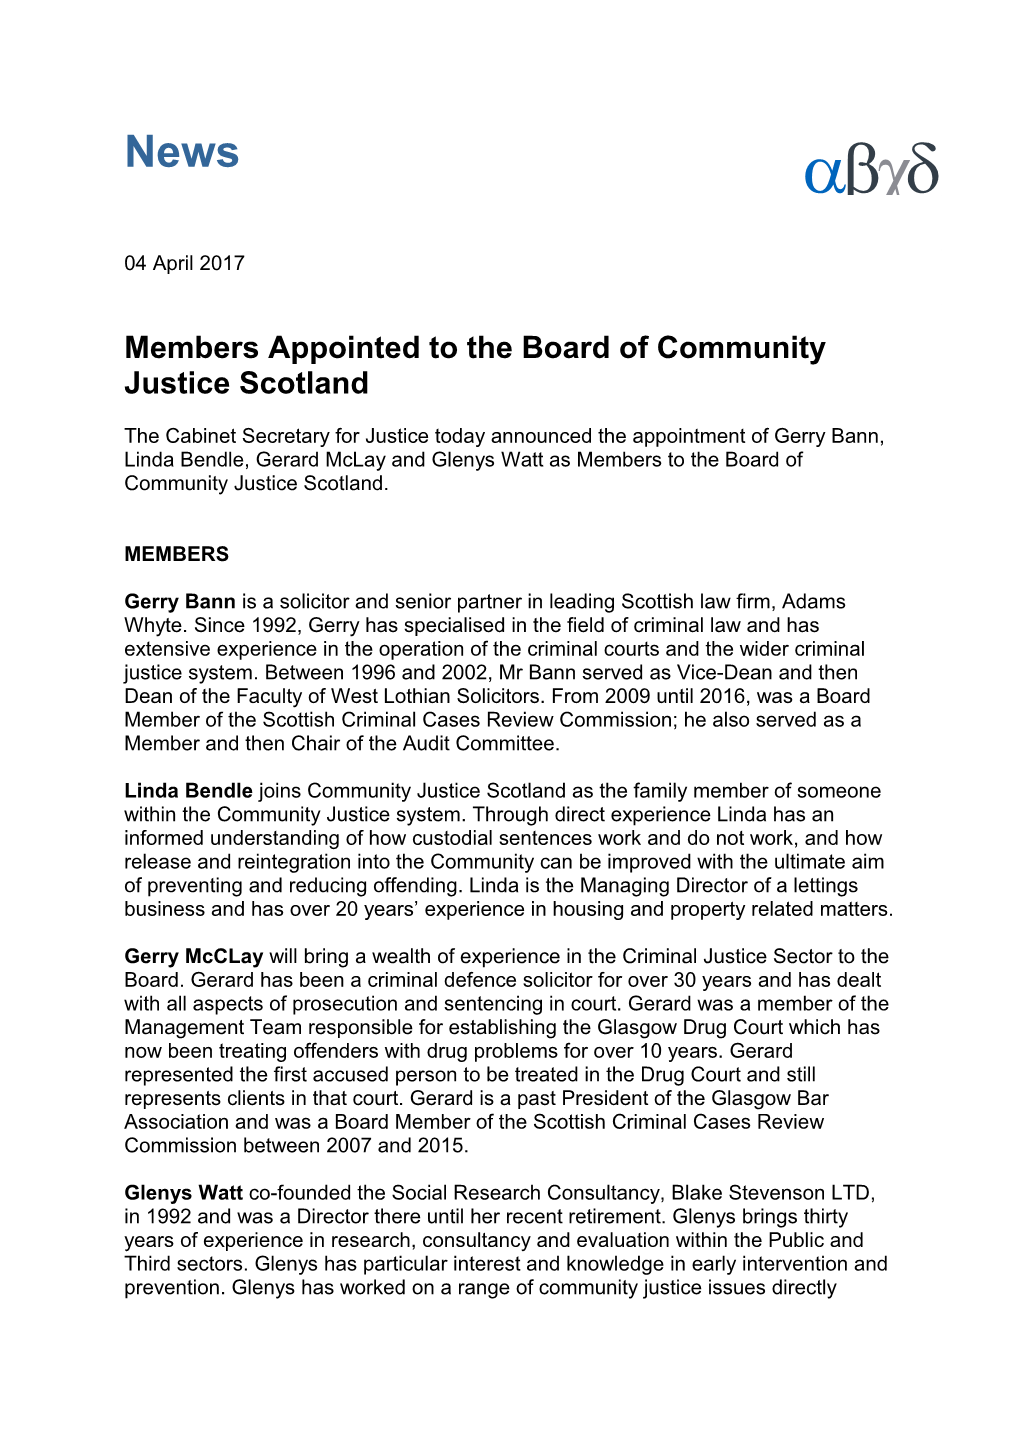 Members Appointed to the Board of Community Justice Scotland